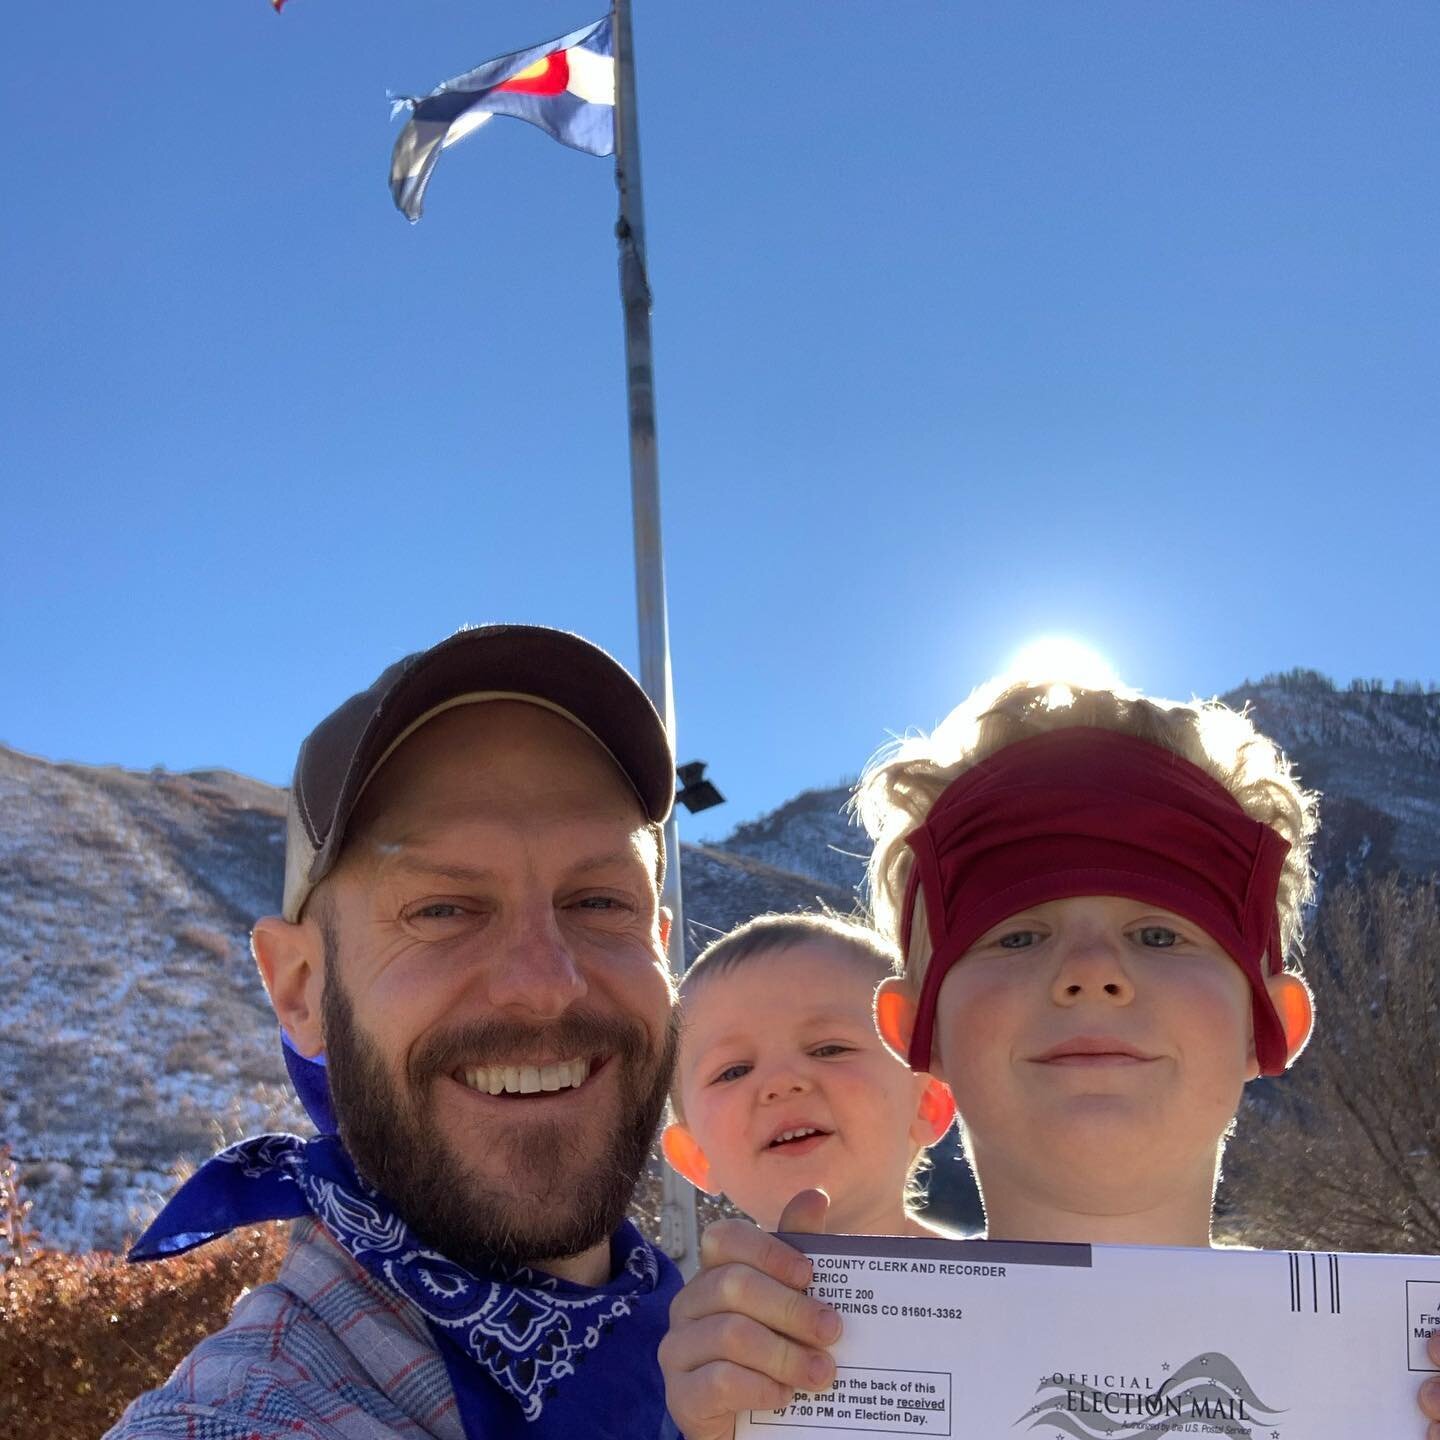 I dropped off our ballots this past week and brought my two boys along to help.  It felt so powerful to share this experience with them.  The night before dropping off the ballots, my wife and I shared some whiskey and halloween cookies and talked th